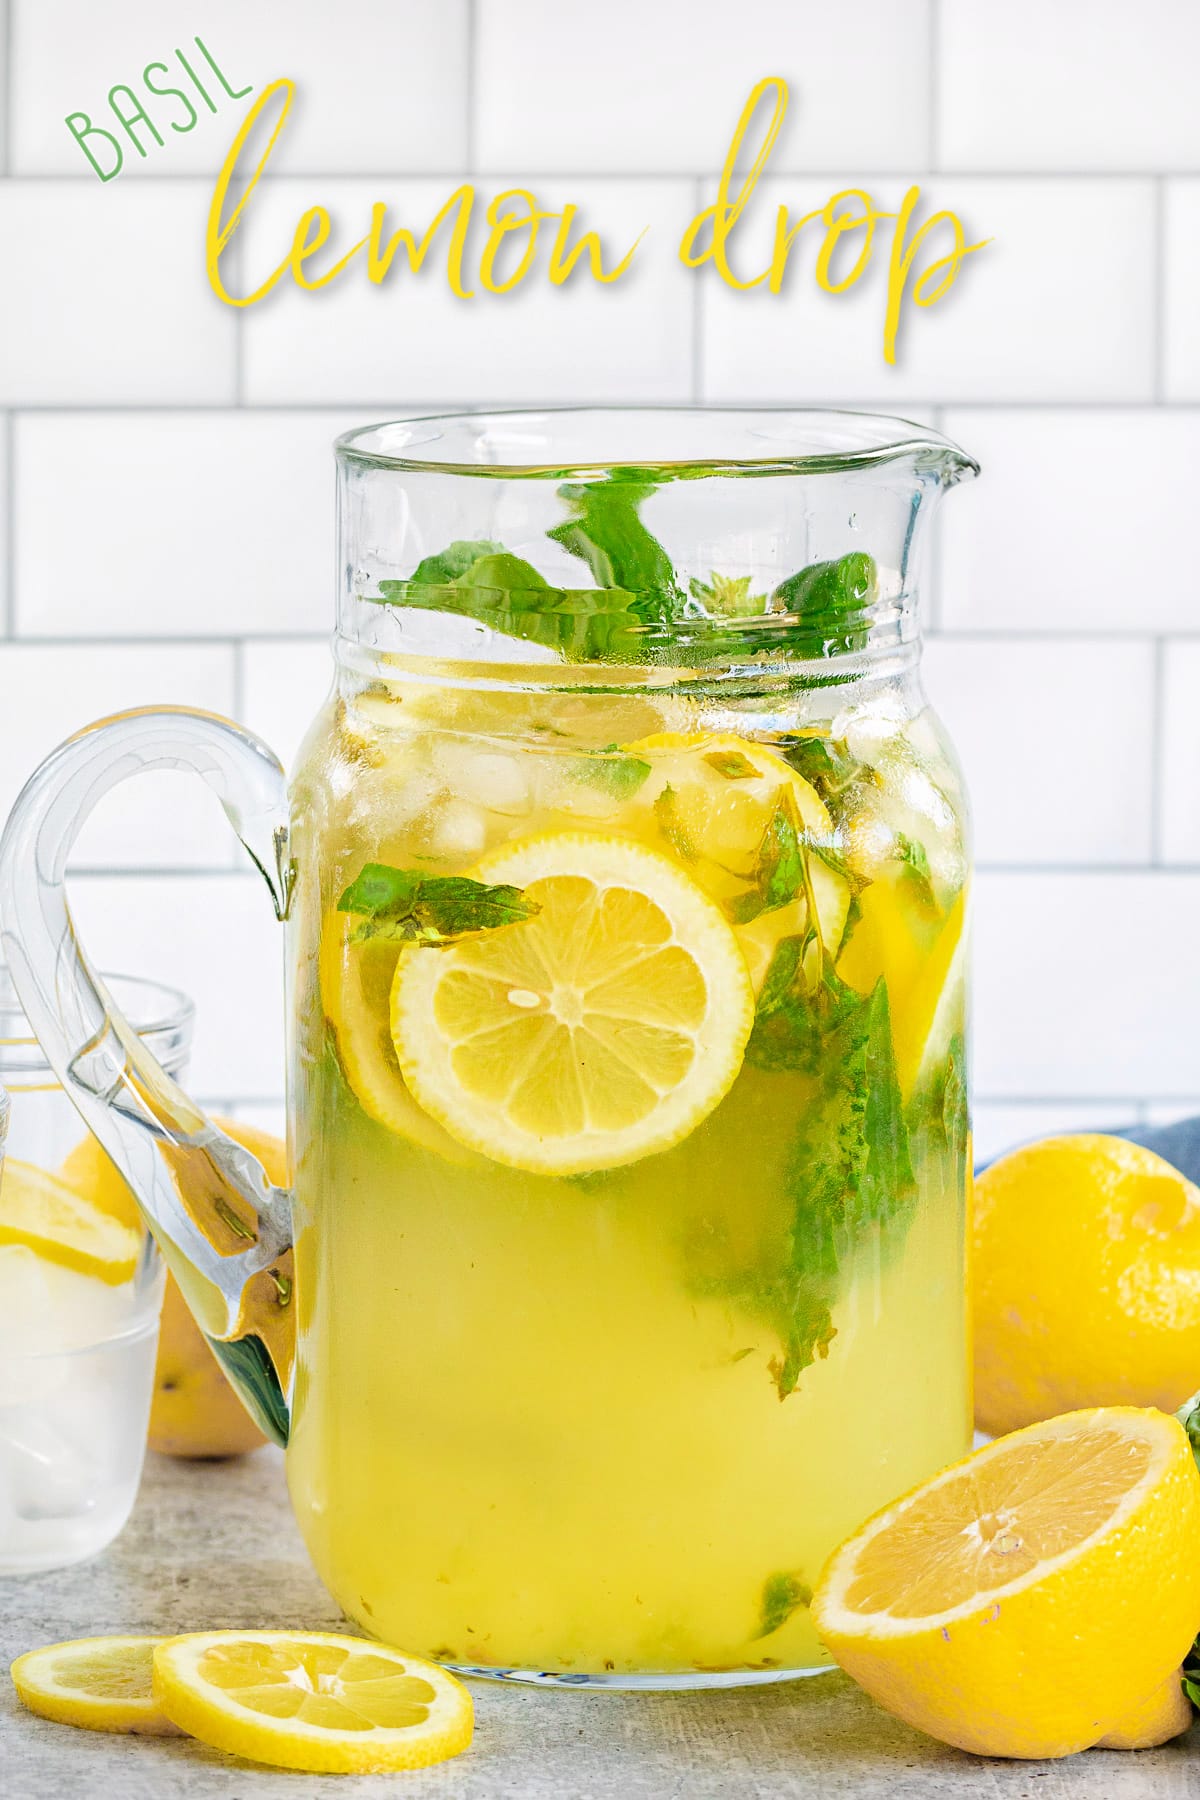 https://www.momontimeout.com/wp-content/uploads/2020/08/basil-lemon-drop-in-glass-pitcher-with-lemon-slices-in-and-around-pitcher-with-title-overlay.jpg